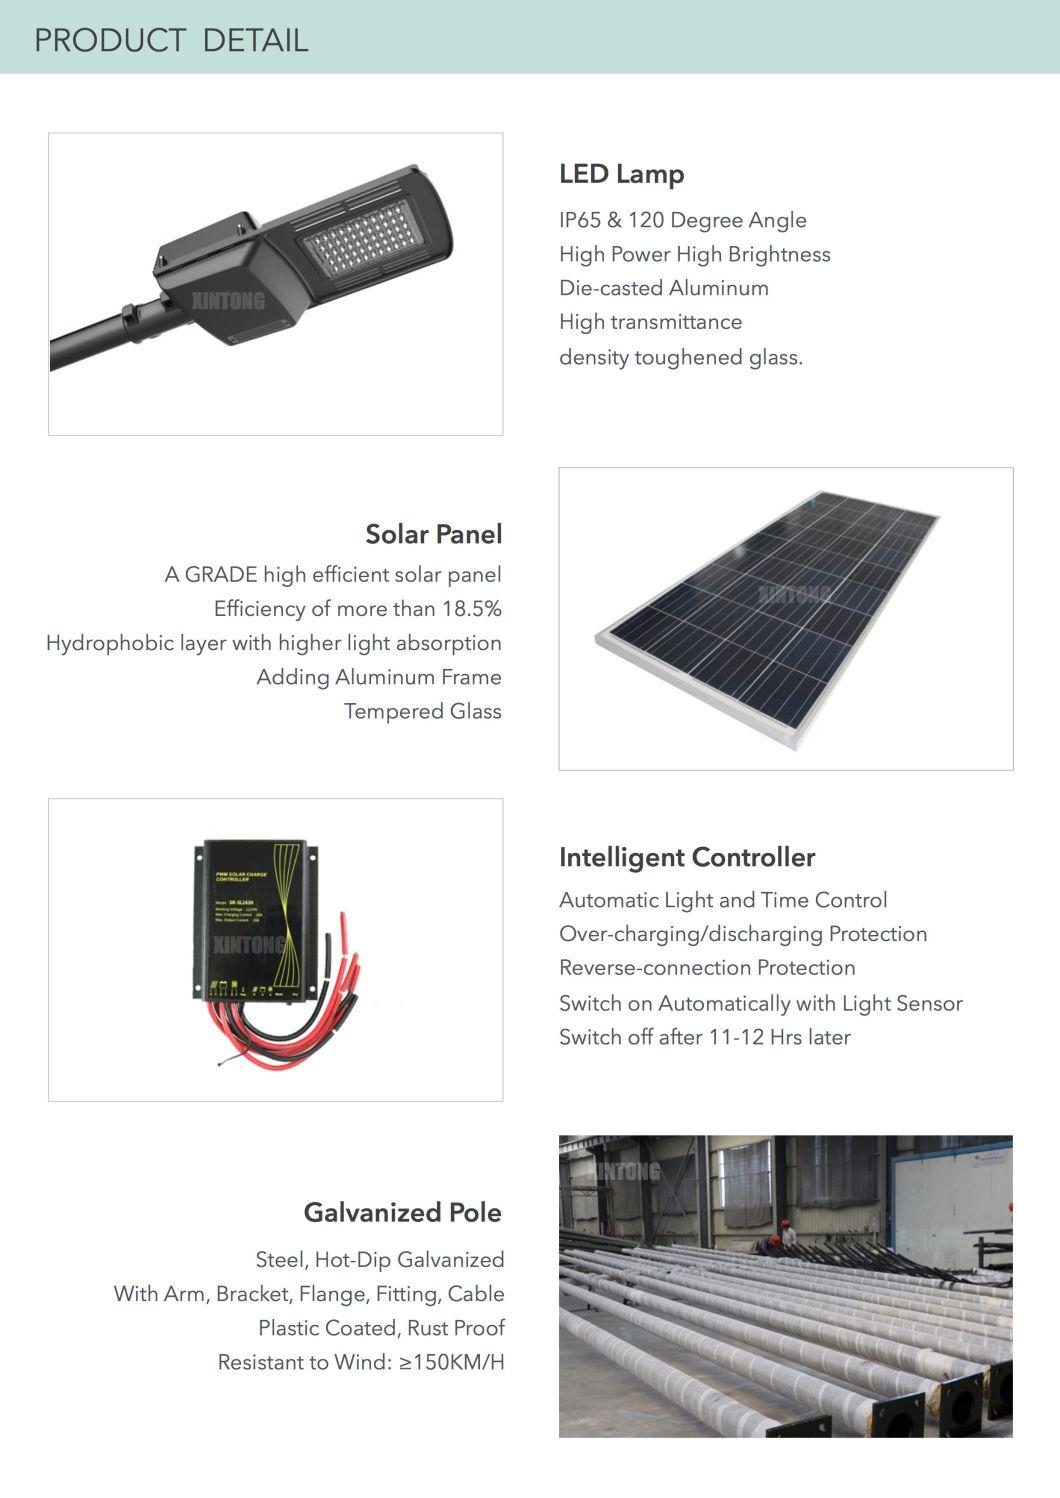 Integrated All in One Solar Landscape LED Lighting